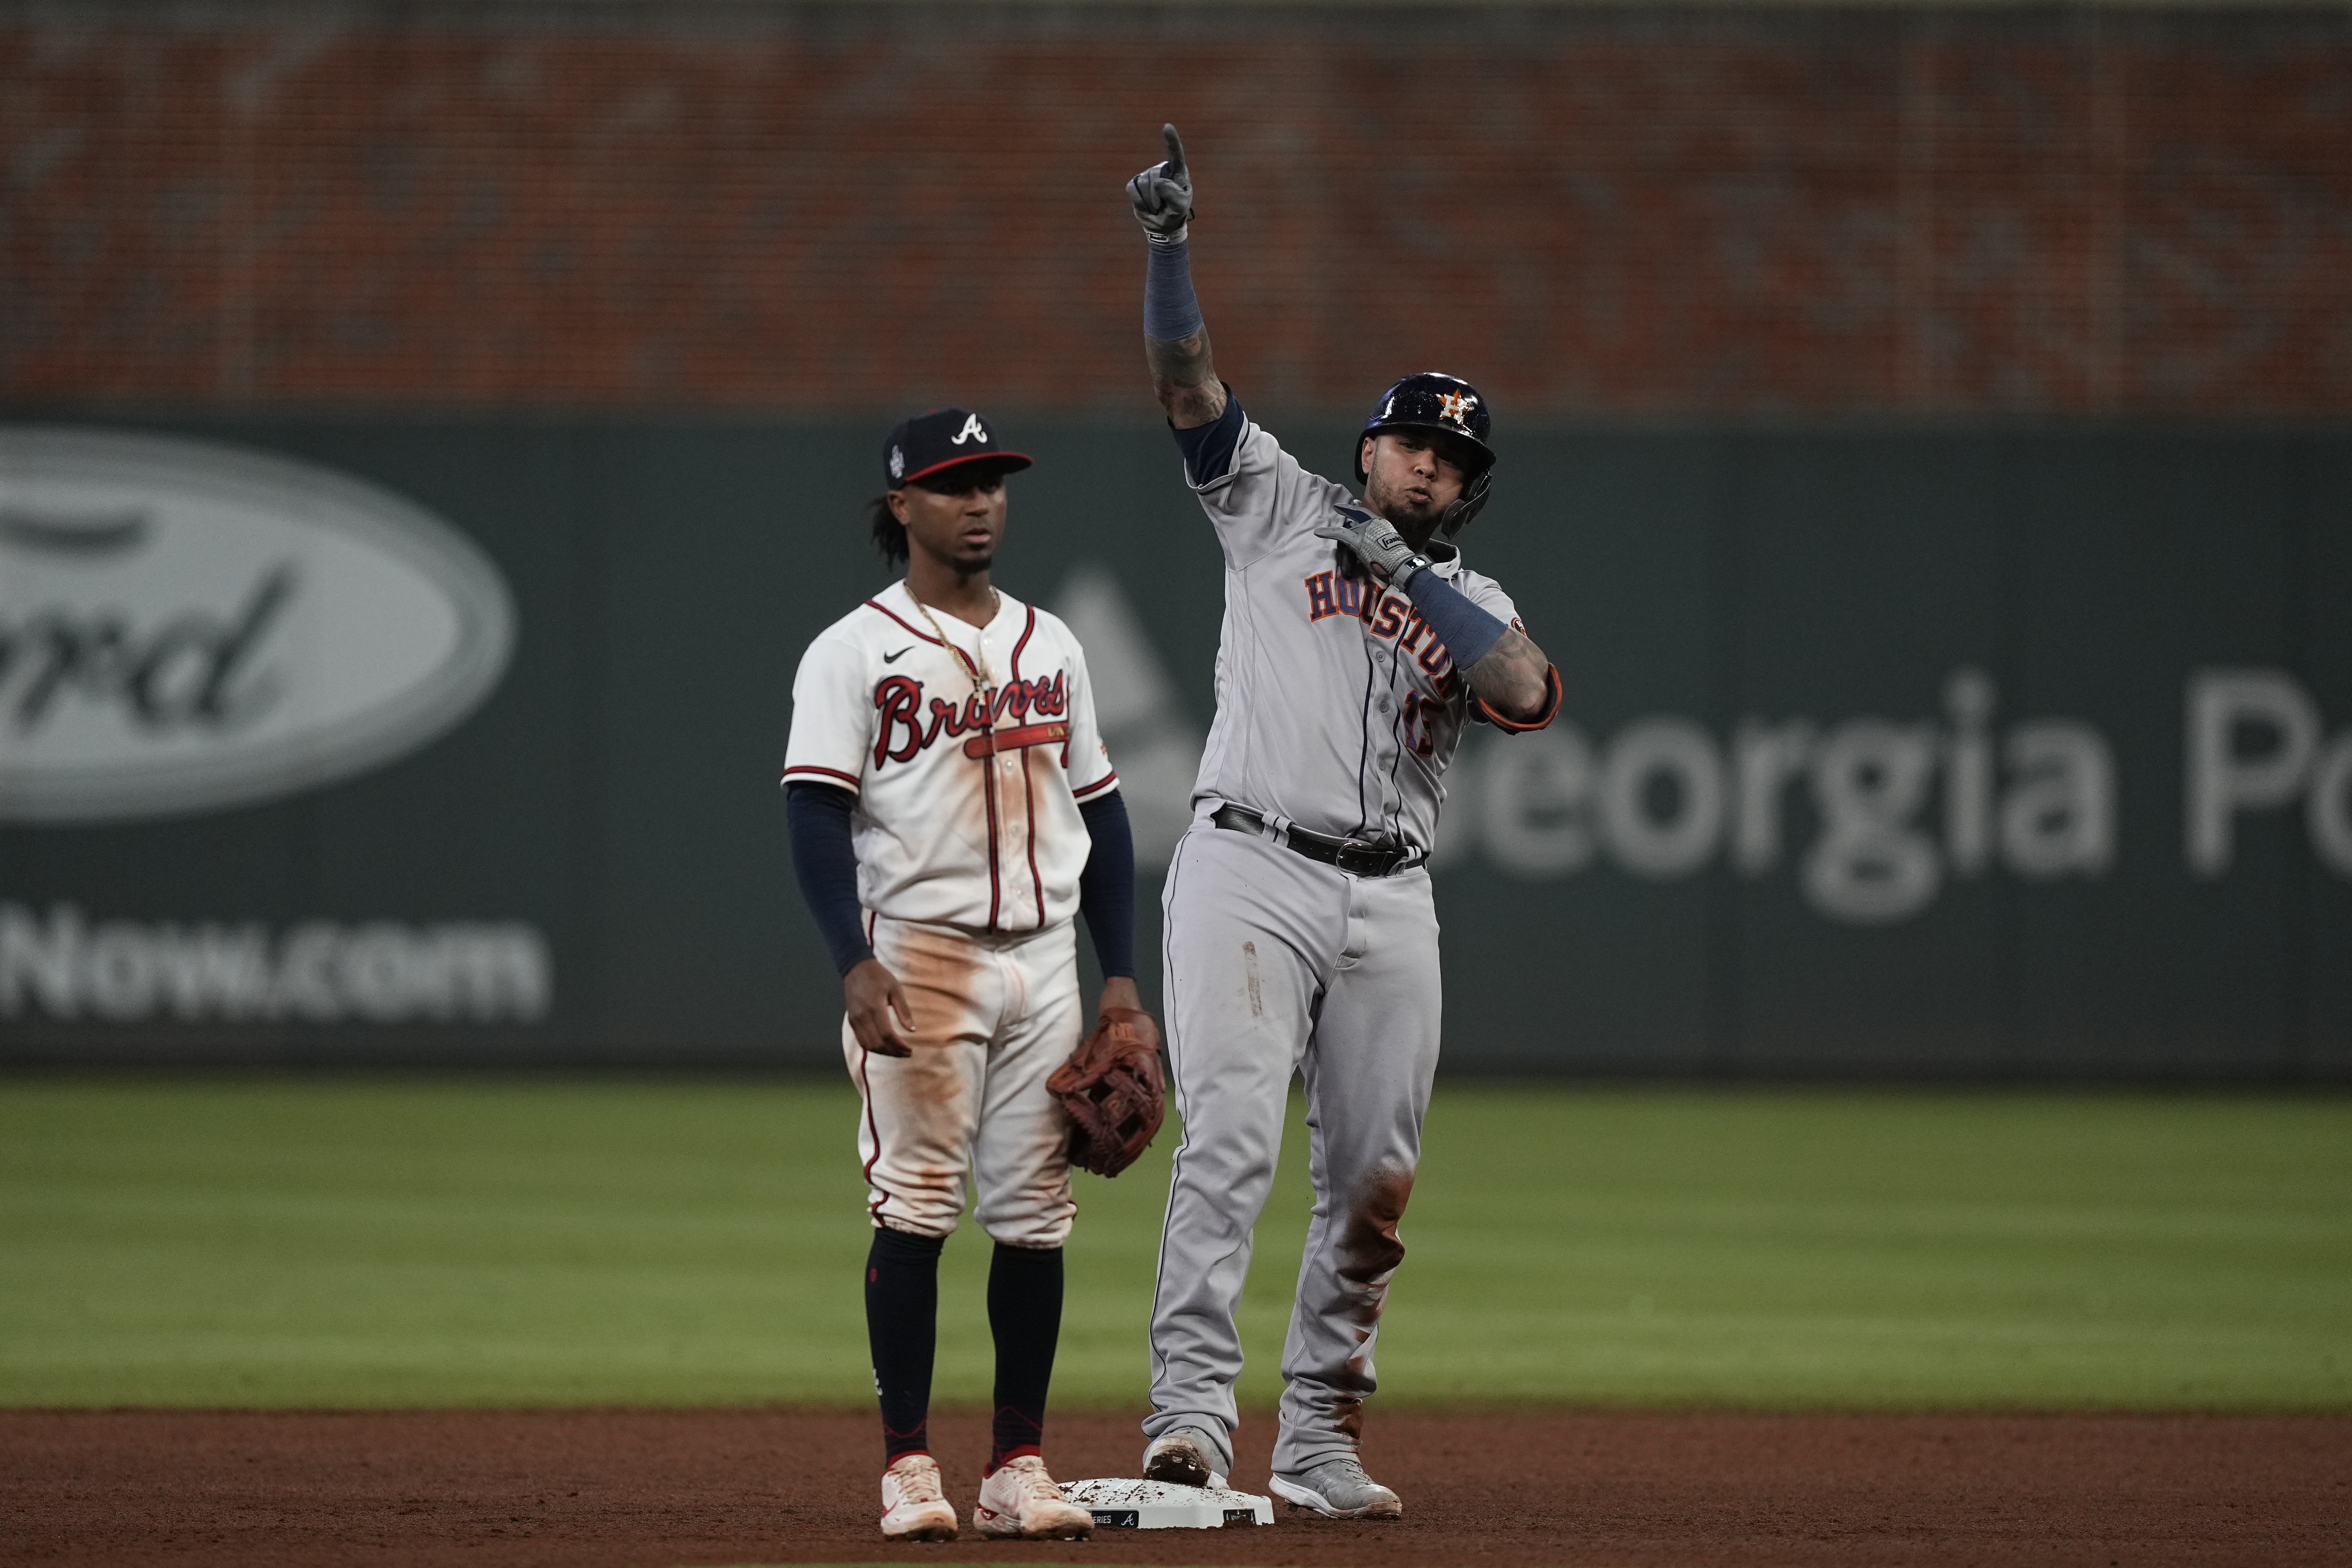 How to Watch the Astros vs. Braves Game: Streaming & TV Info